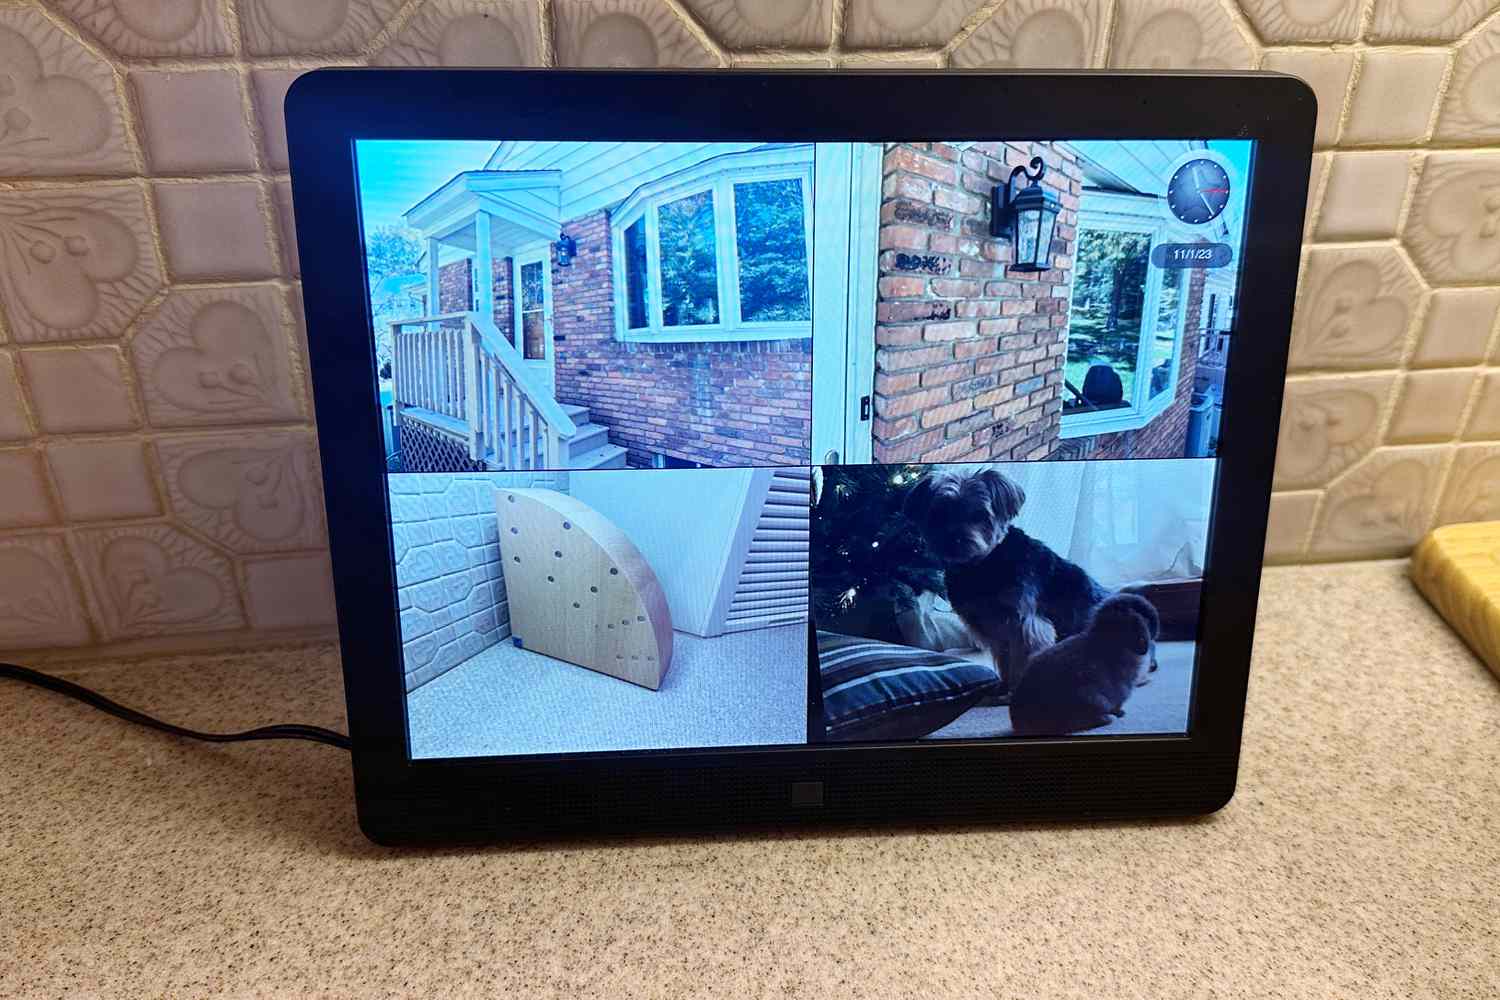 Pix-Star 10 inch WiFi Digital Picture Frame on a kitchen counter displaying 4 pictures